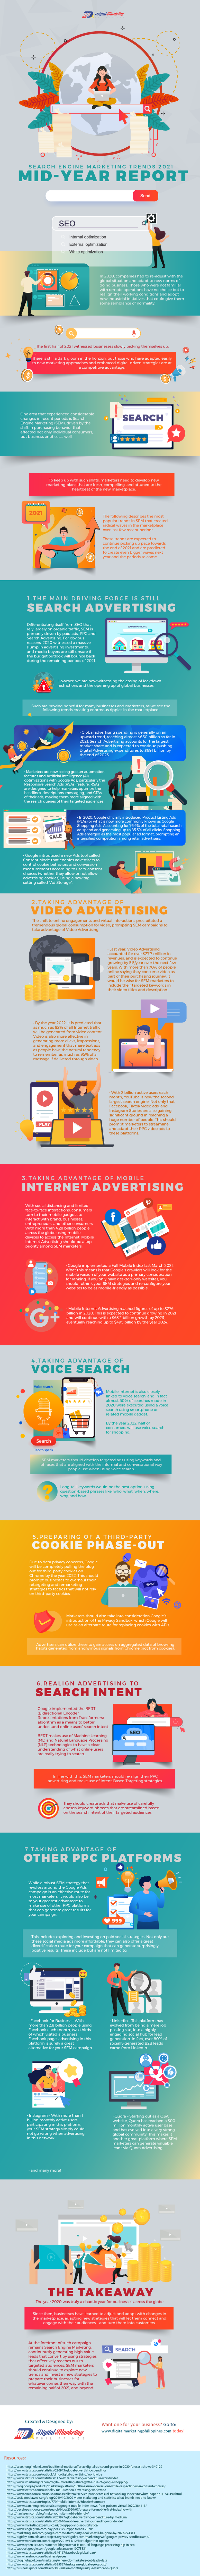 Search Engine Marketing Trends 2021 – Mid-Year Report Infographic